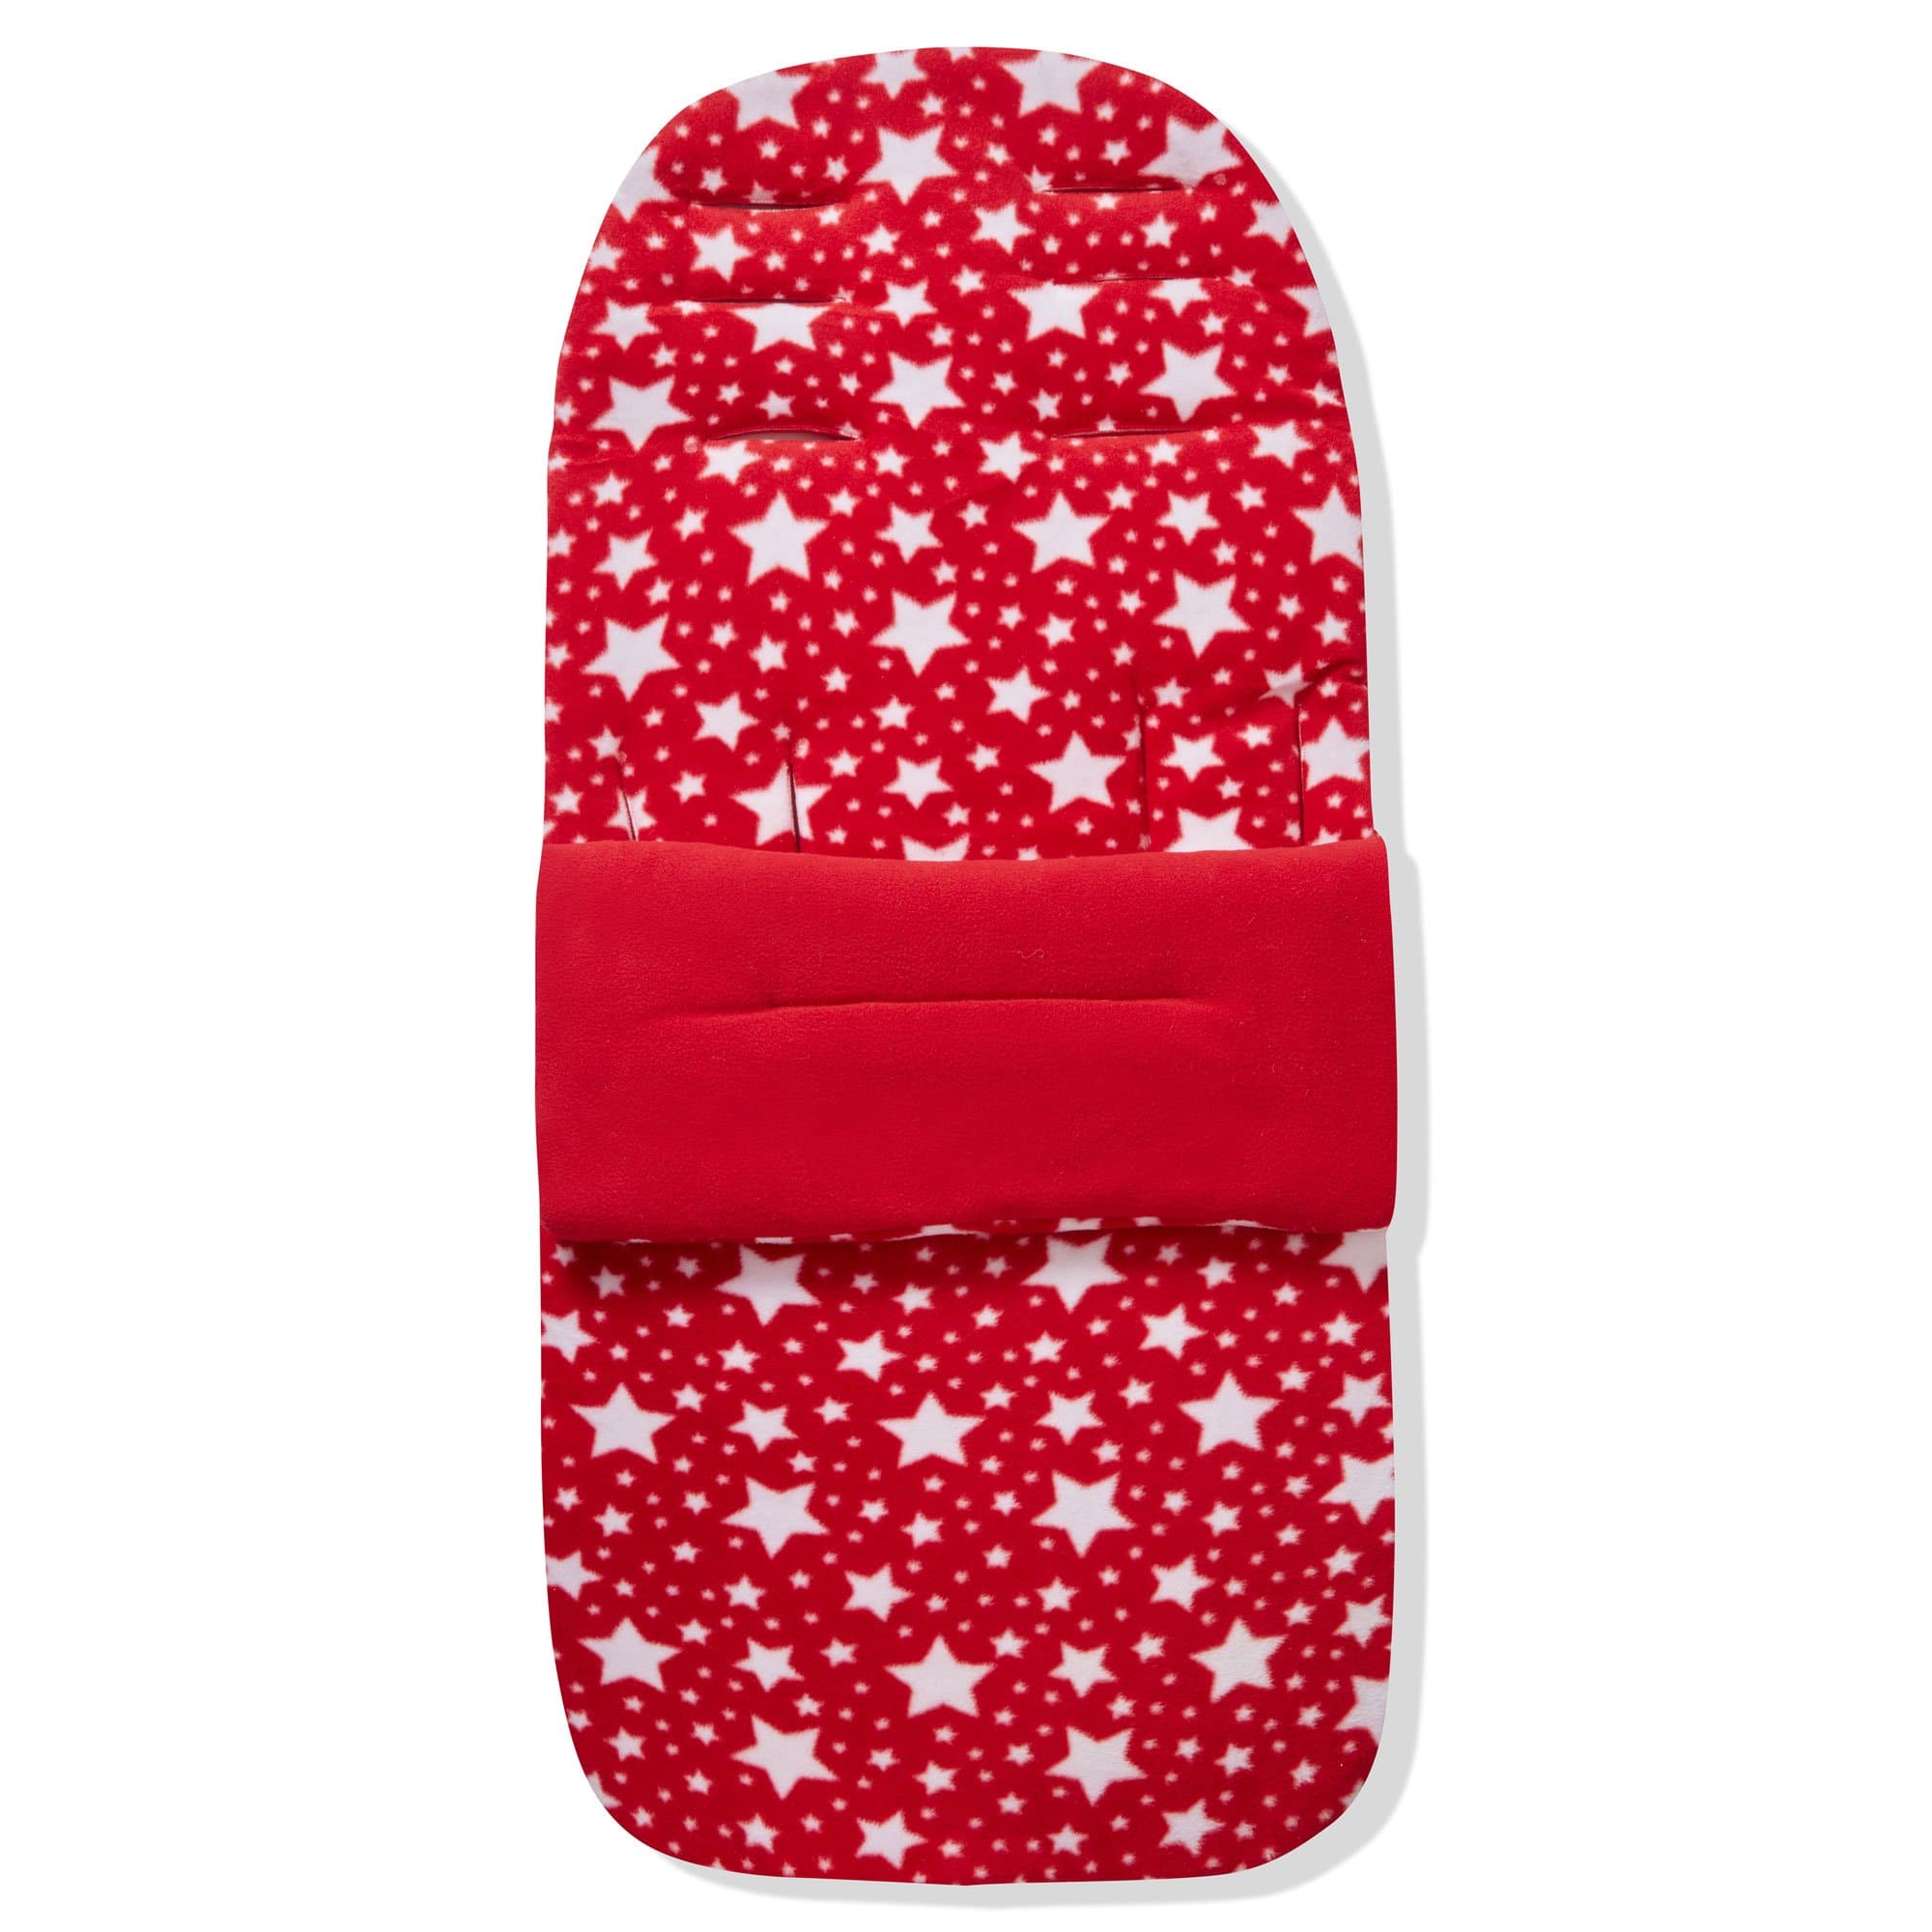 Fleece Footmuff / Cosy Toes Compatible with TFK - Red Star / Fits All Models | For Your Little One